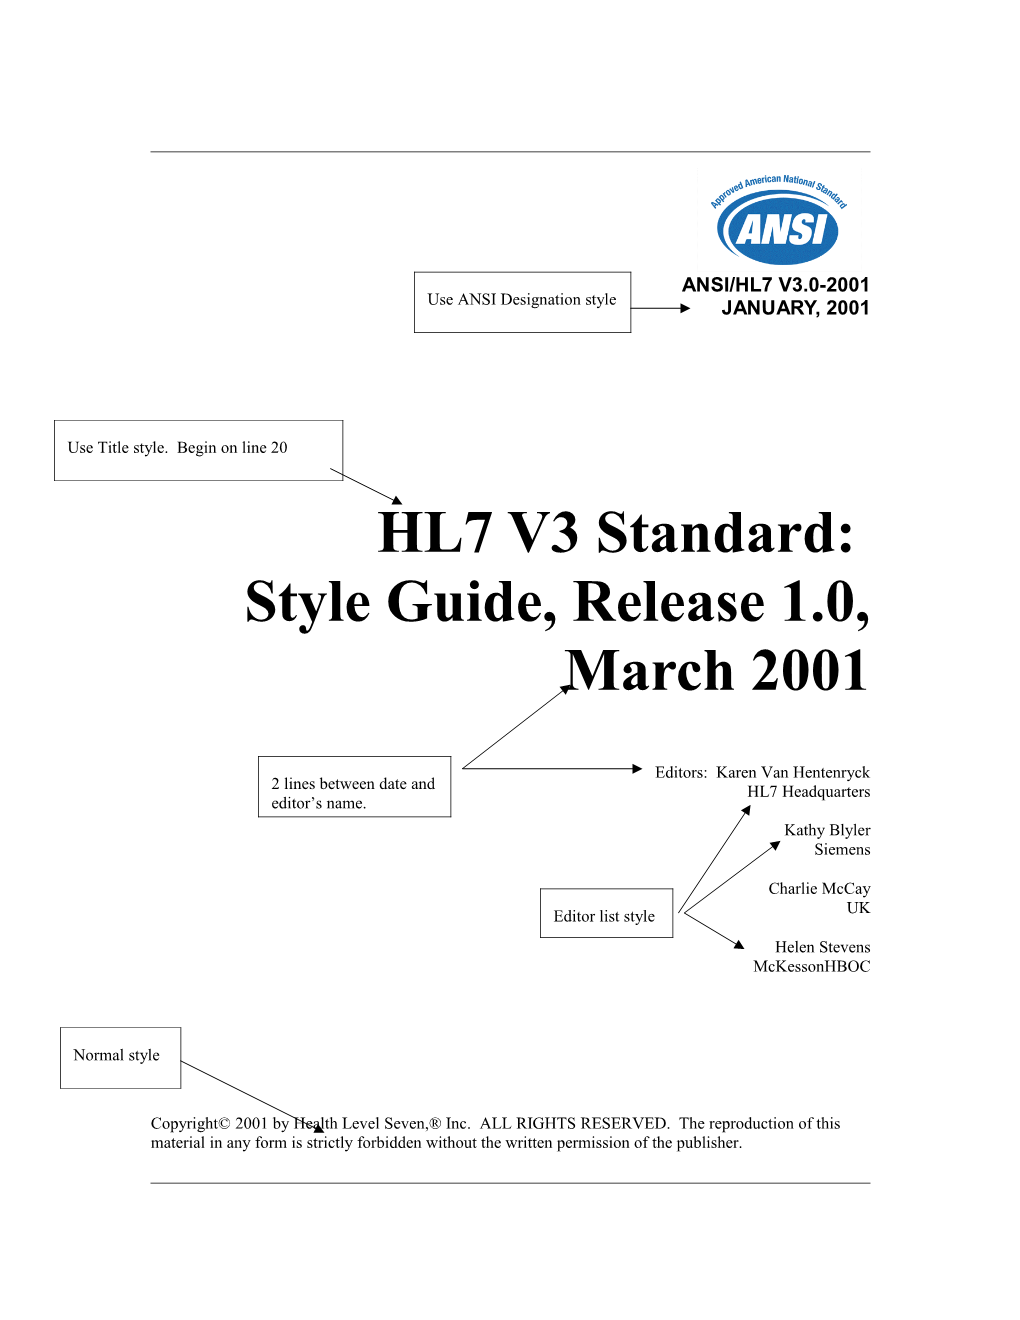 HL7 Style Guide, Release 1.0